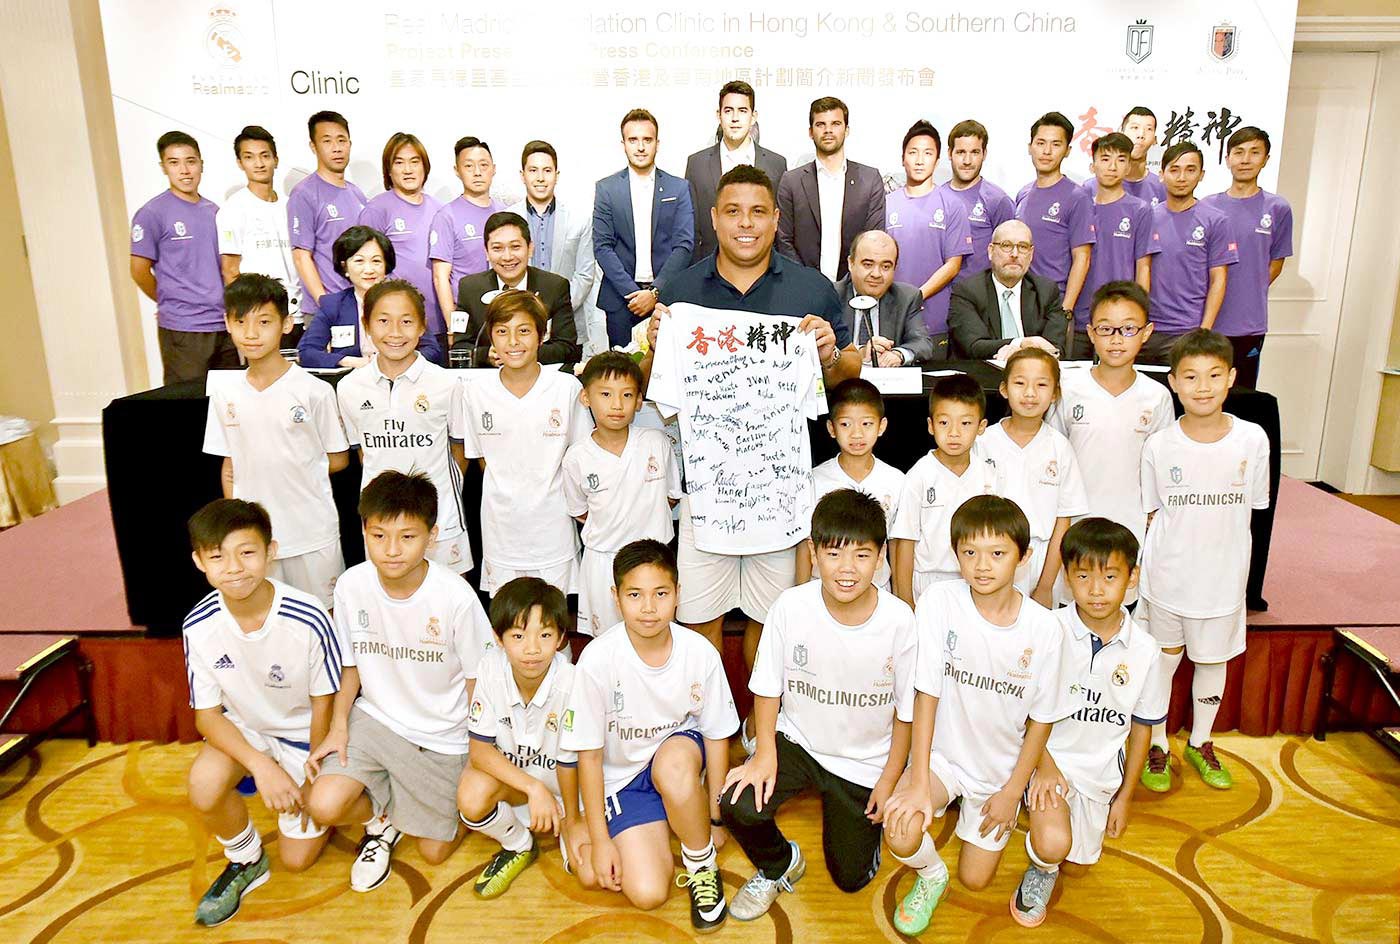 Real Madrid star Ronaldo called on Hong Kong last year and encouraged its youths to keep the Hong Kong spirit alive <em>(courtesy of the interviewee)</em>